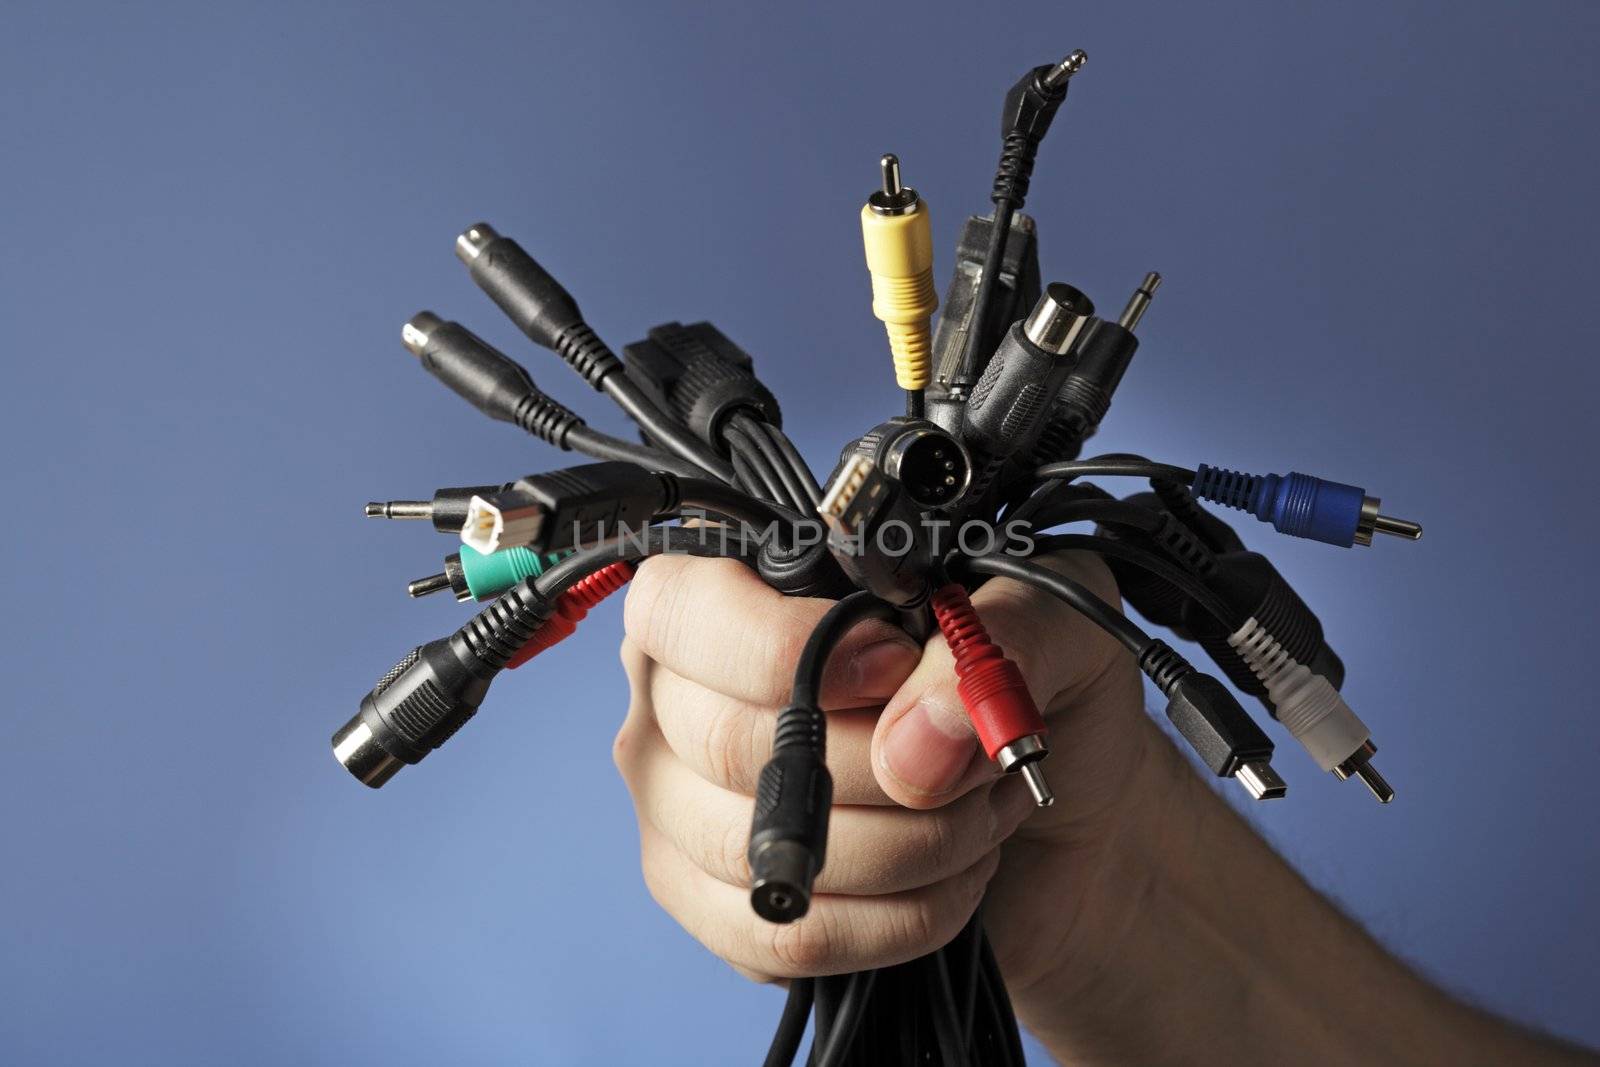 FINLAND - CIRCA 2008: Man holding a bunch of different audio/video and computer cables in his hand circa 2008 in Finland